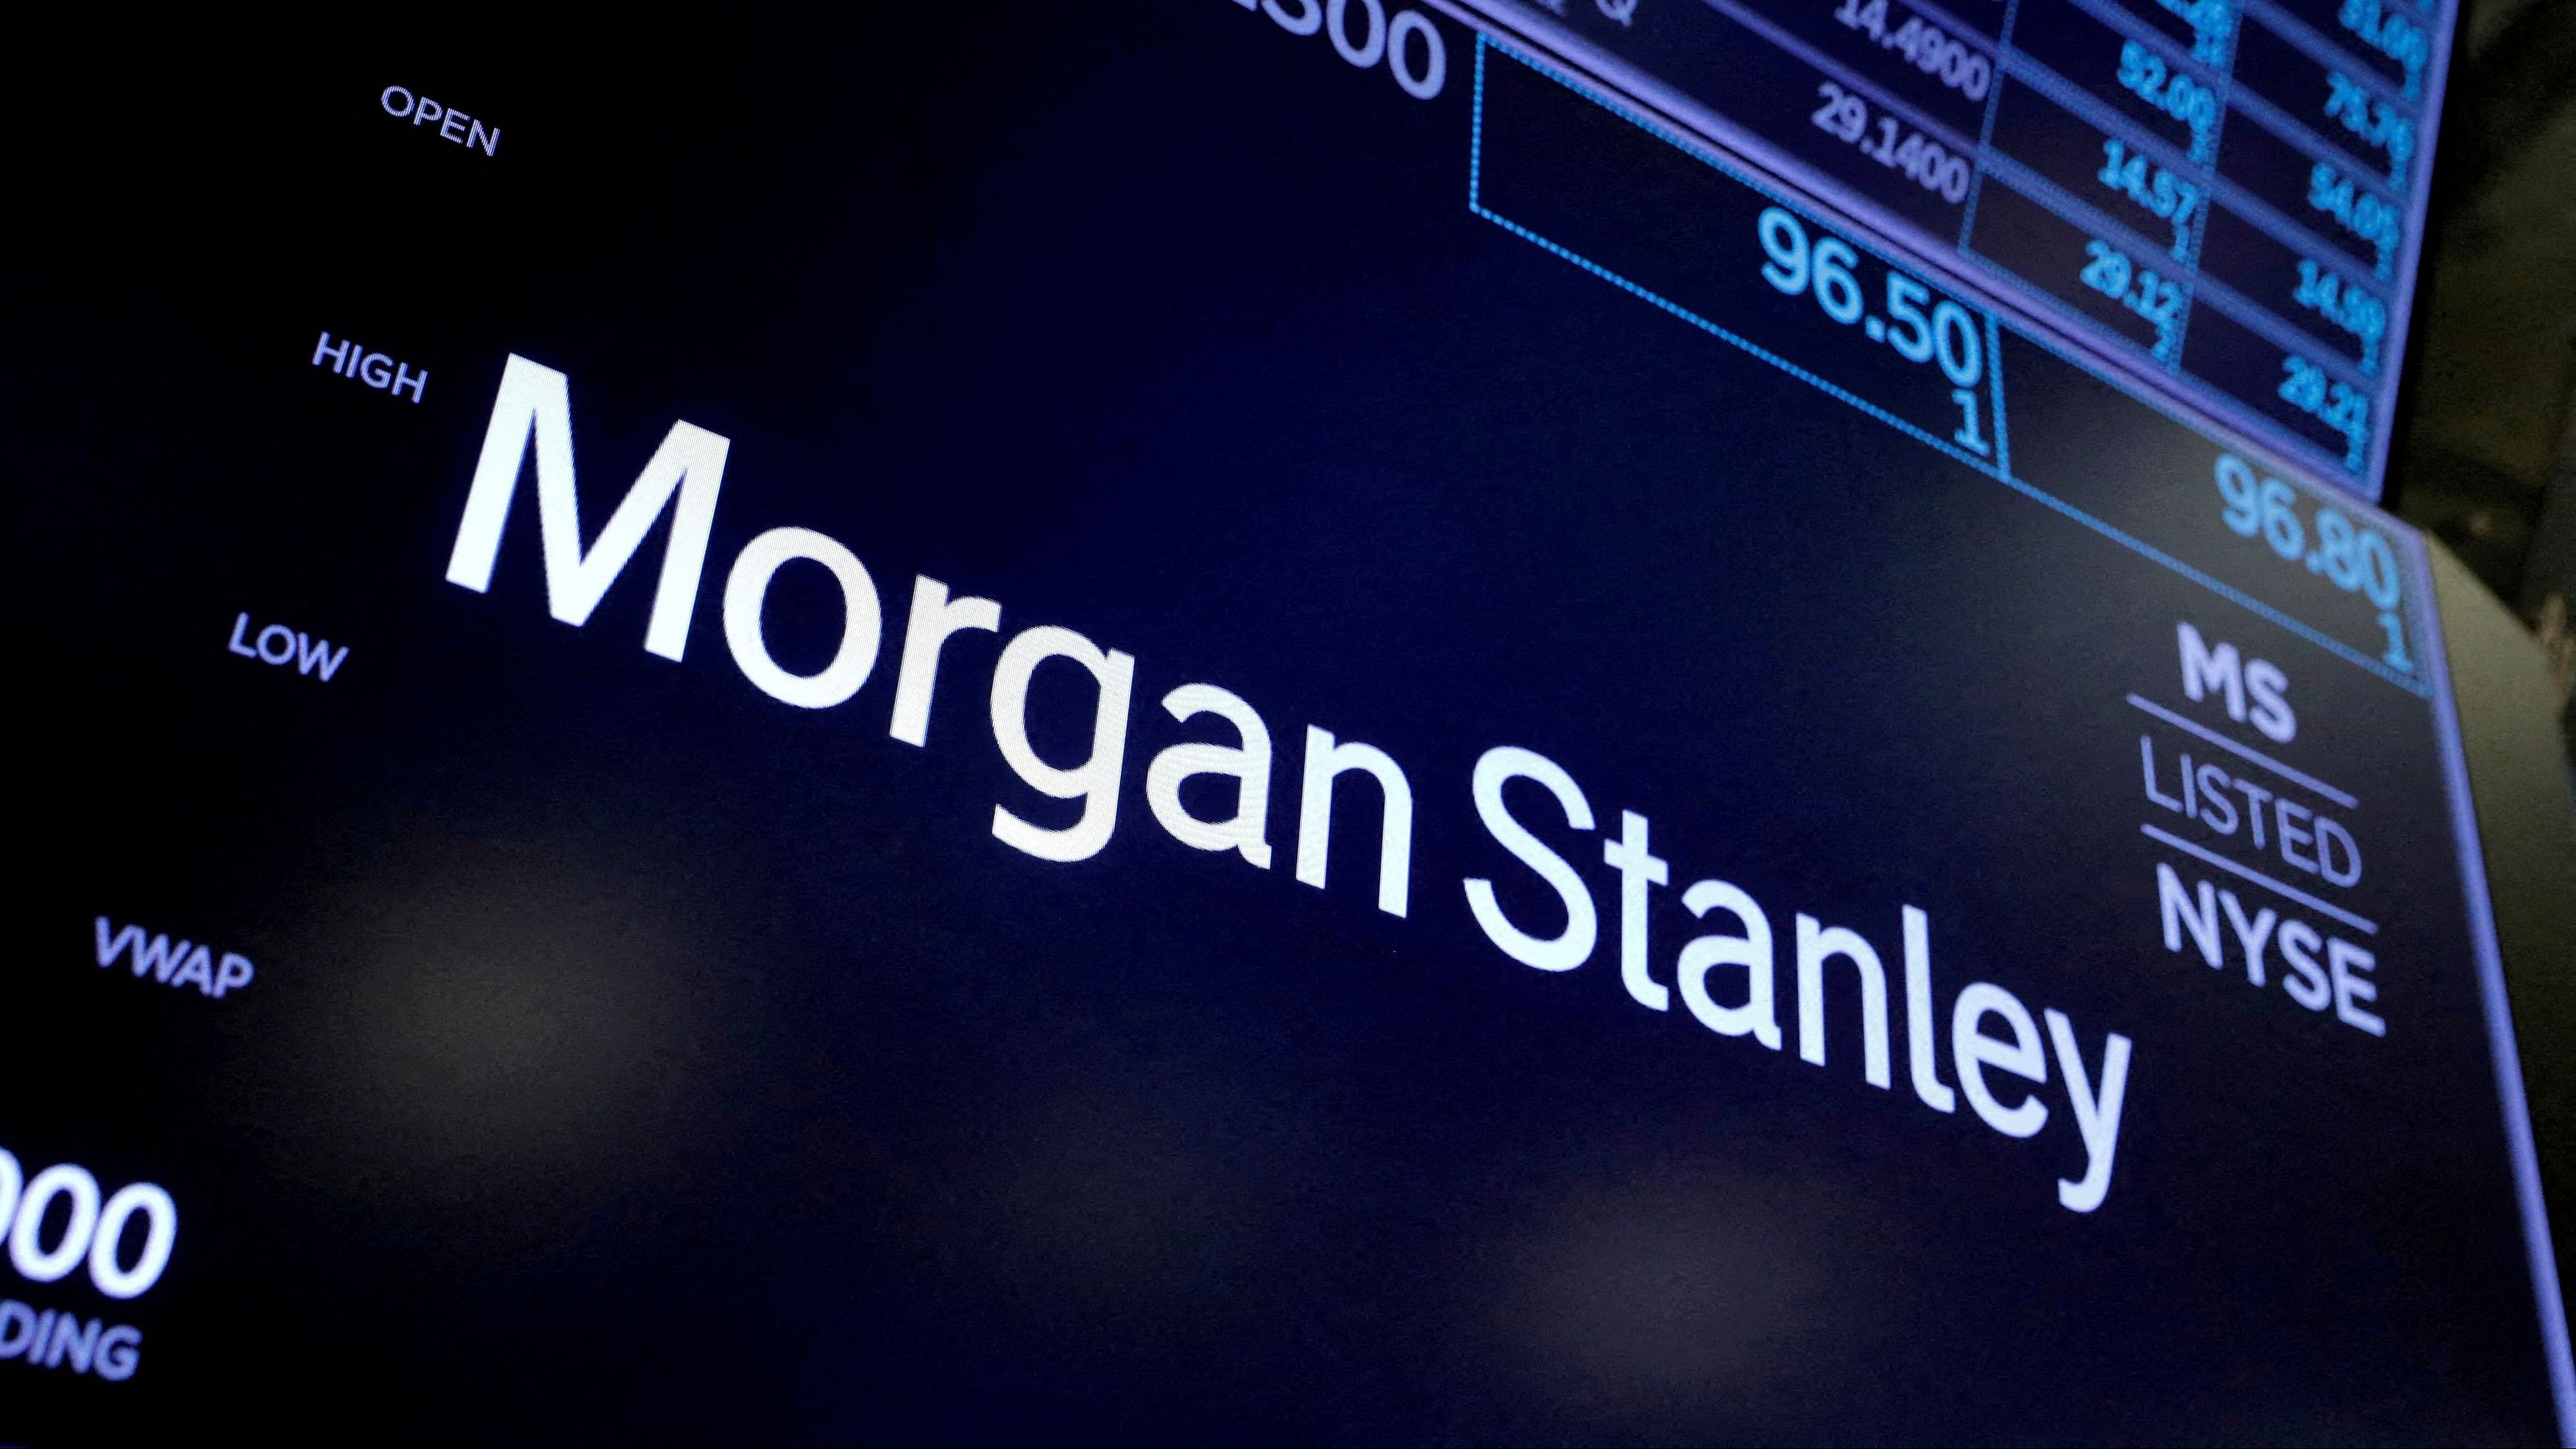 <div class="paragraphs"><p>The logo for Morgan Stanley is seen on the trading floor at the New York Stock Exchange</p></div>